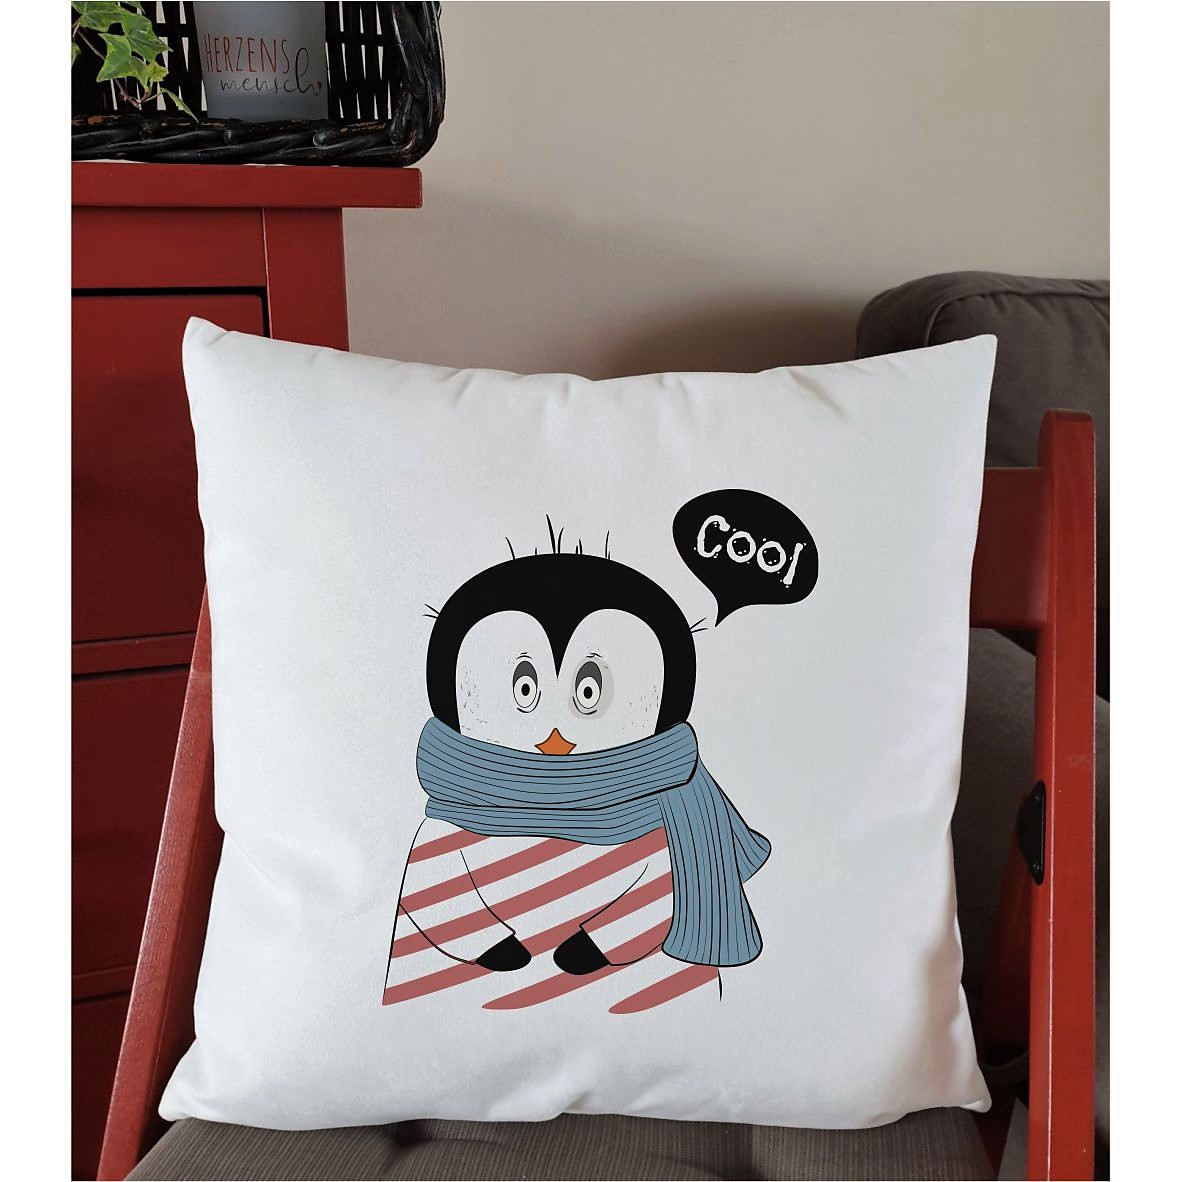 Flauschiges Kissen "Cooly Pinguin"